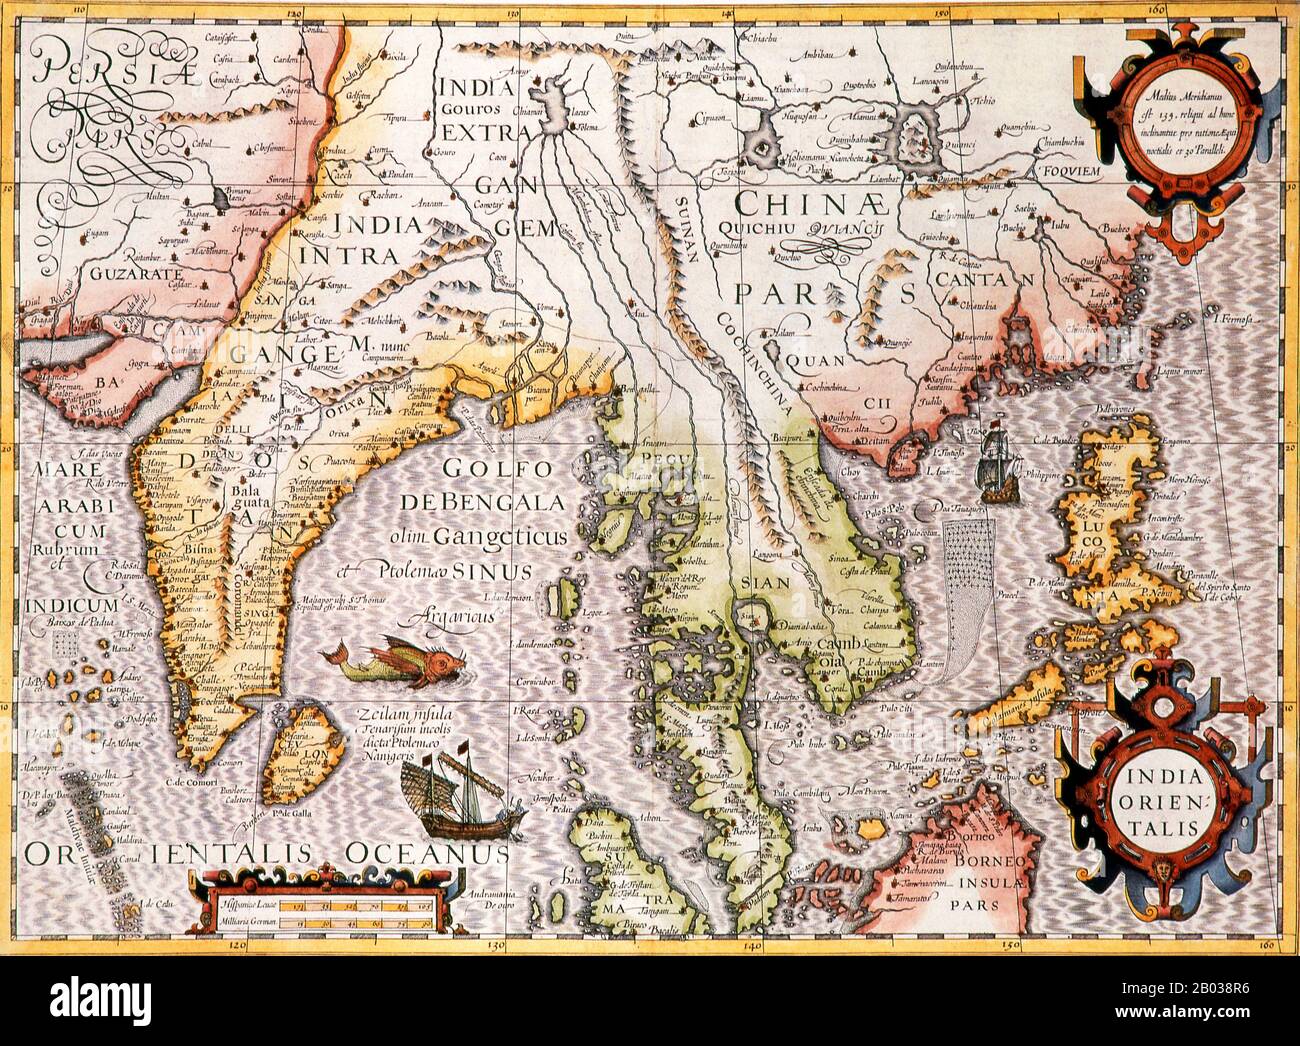 Jodocus Hondius (Dutch name: Joost de Hondt) (1563 – 1612) was a Flemish engraver and cartographer. He helped establish Amsterdam as the center of cartography in Europe in the 17th century. Stock Photo